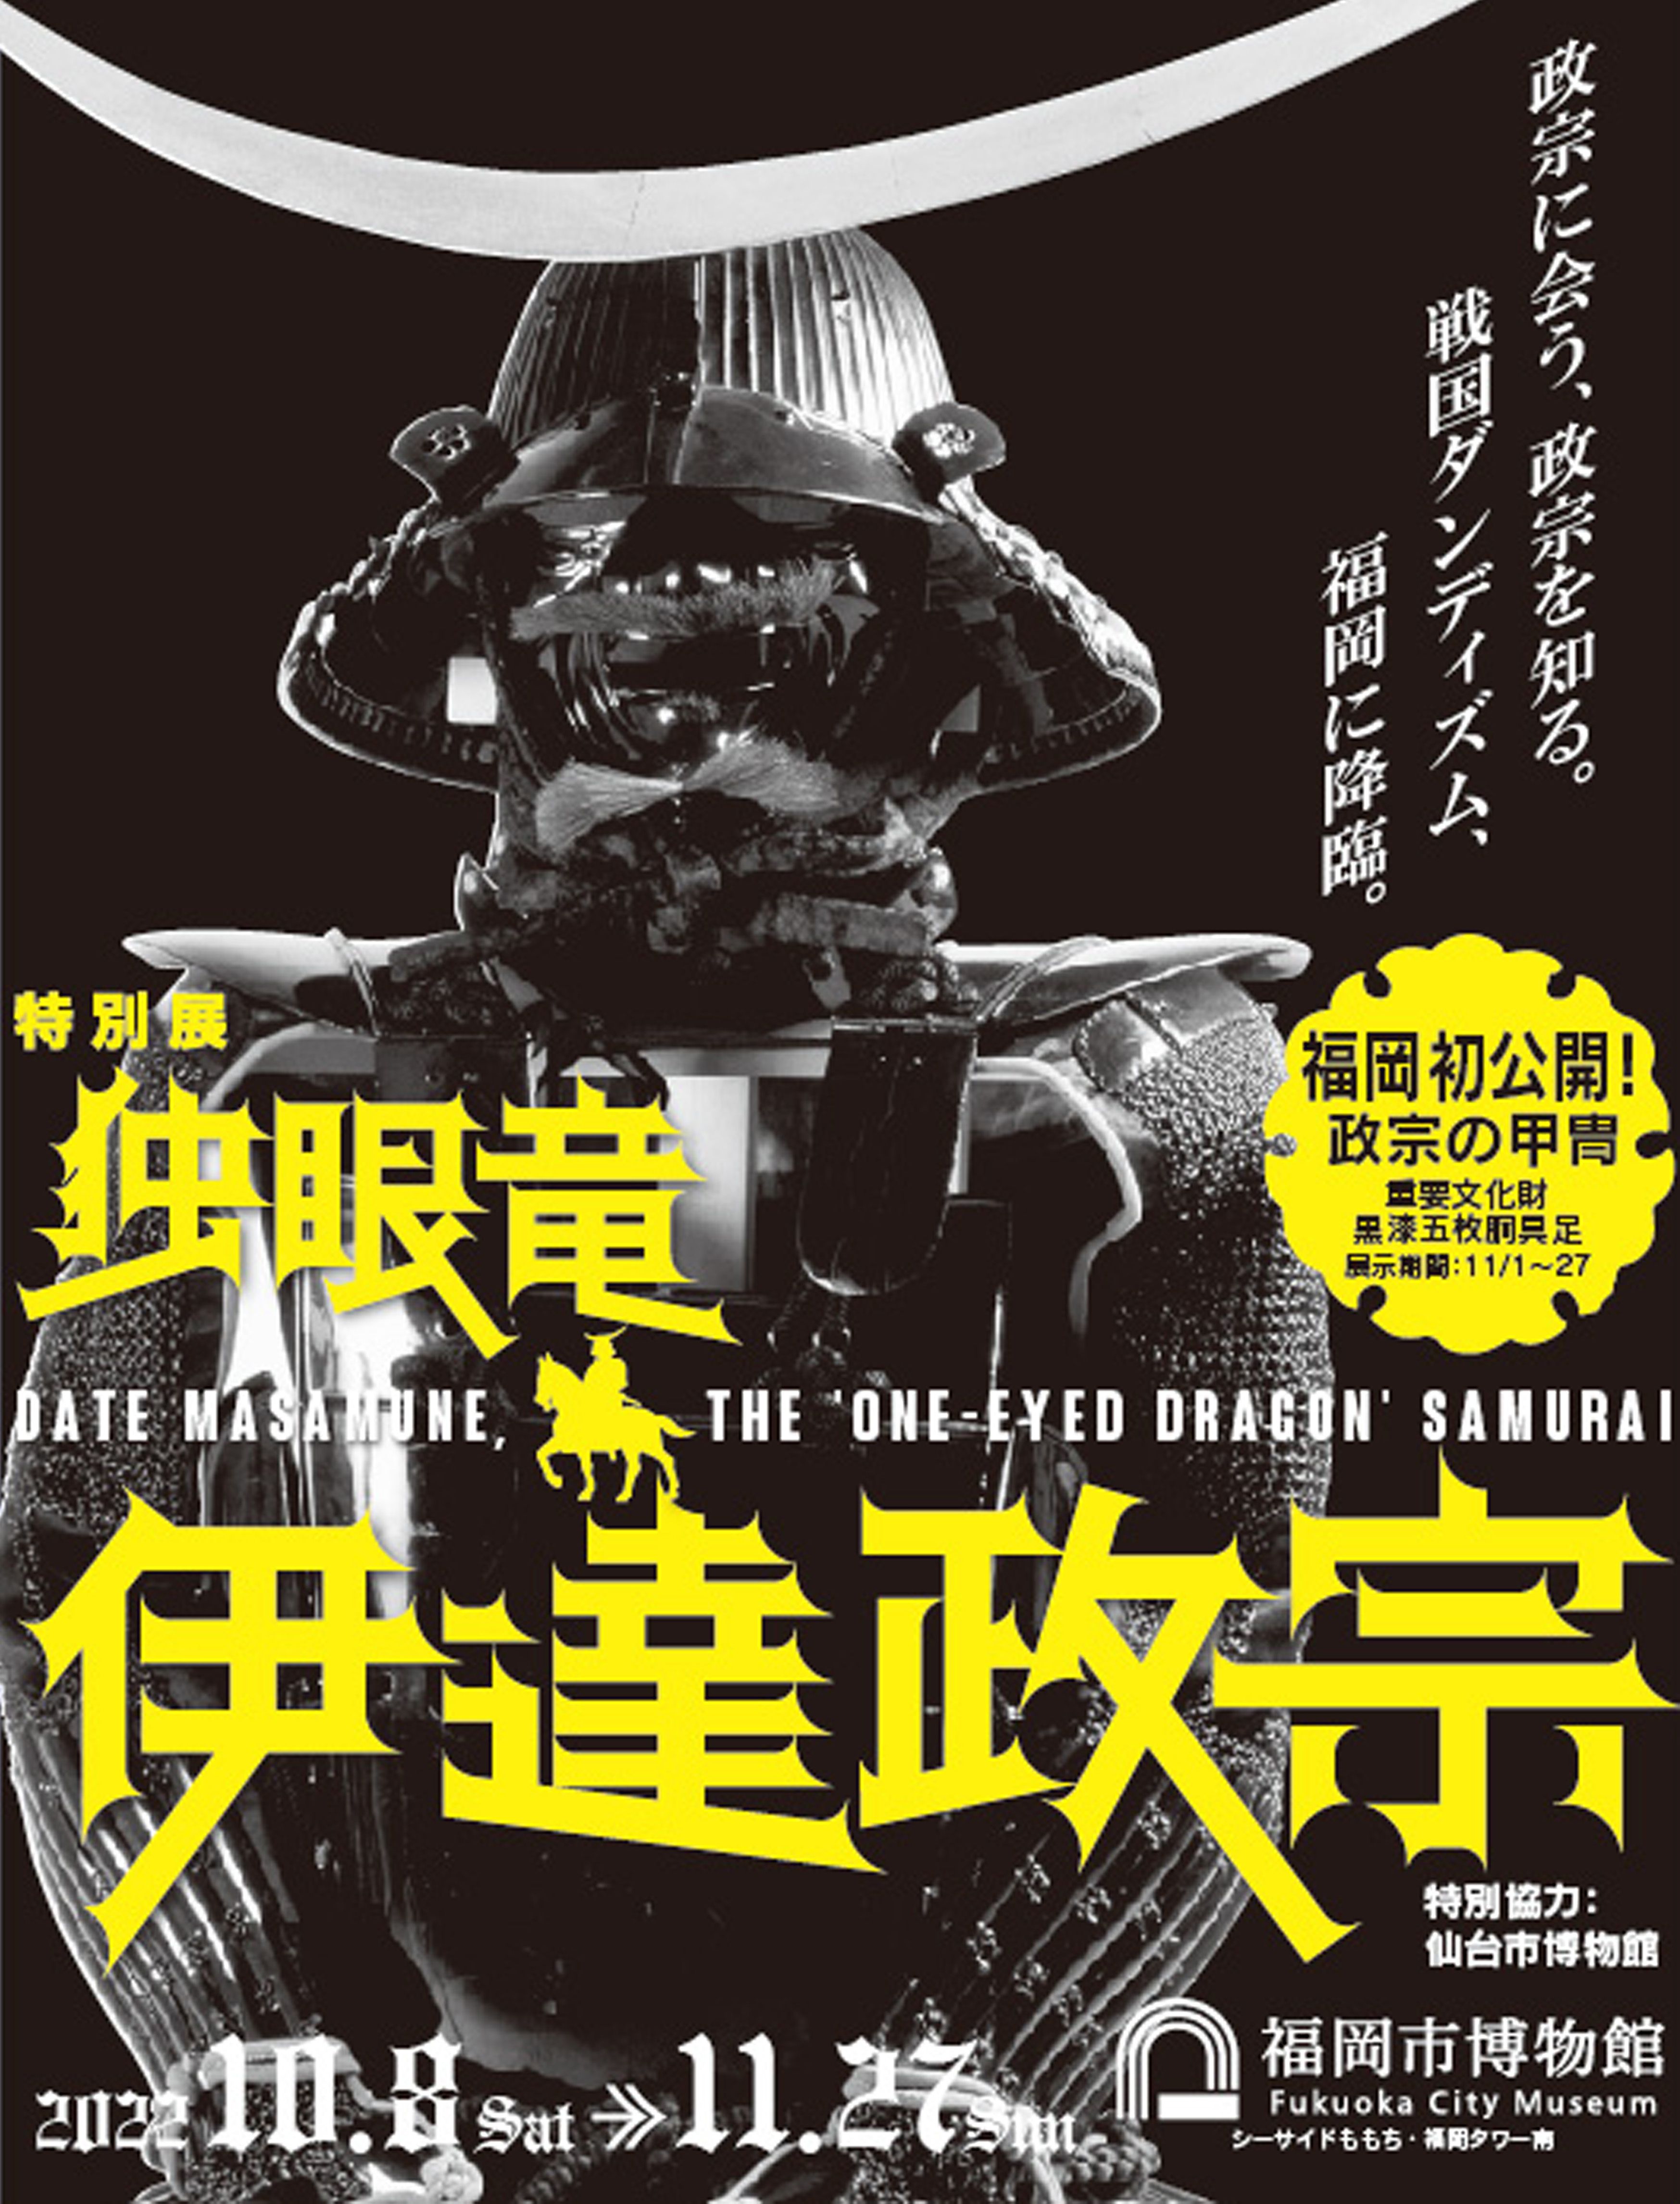 Mutual discount plan with Fukuoka City Museum Special Exhibition “One-Eyed Dragon Date Masamune”